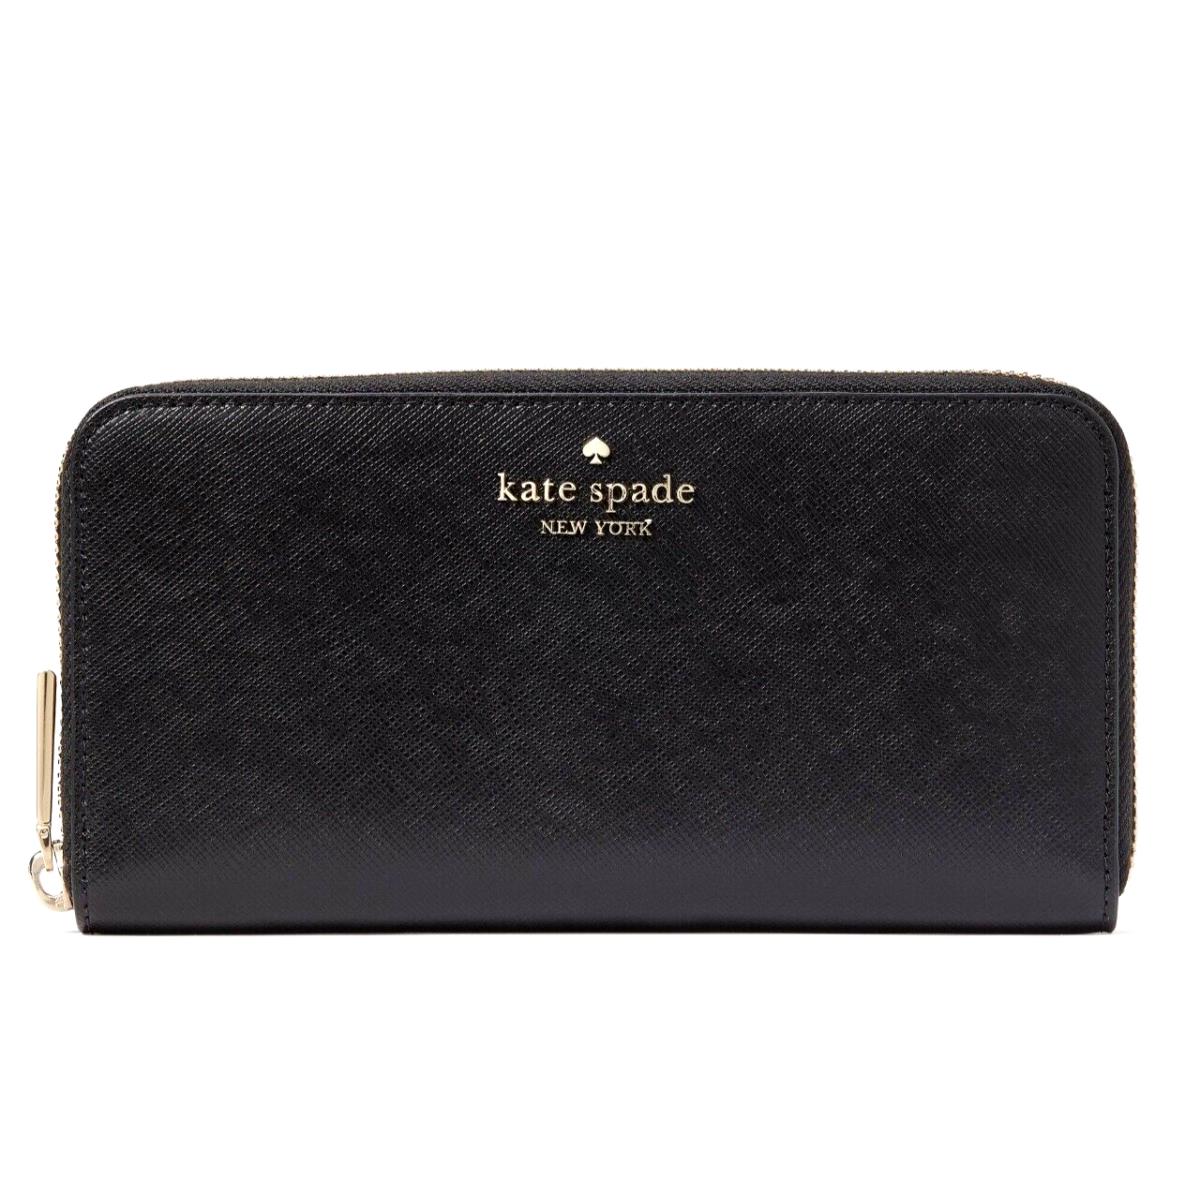 New Kate Spade Madison Saffiano Leather Large Continental Wallet Black